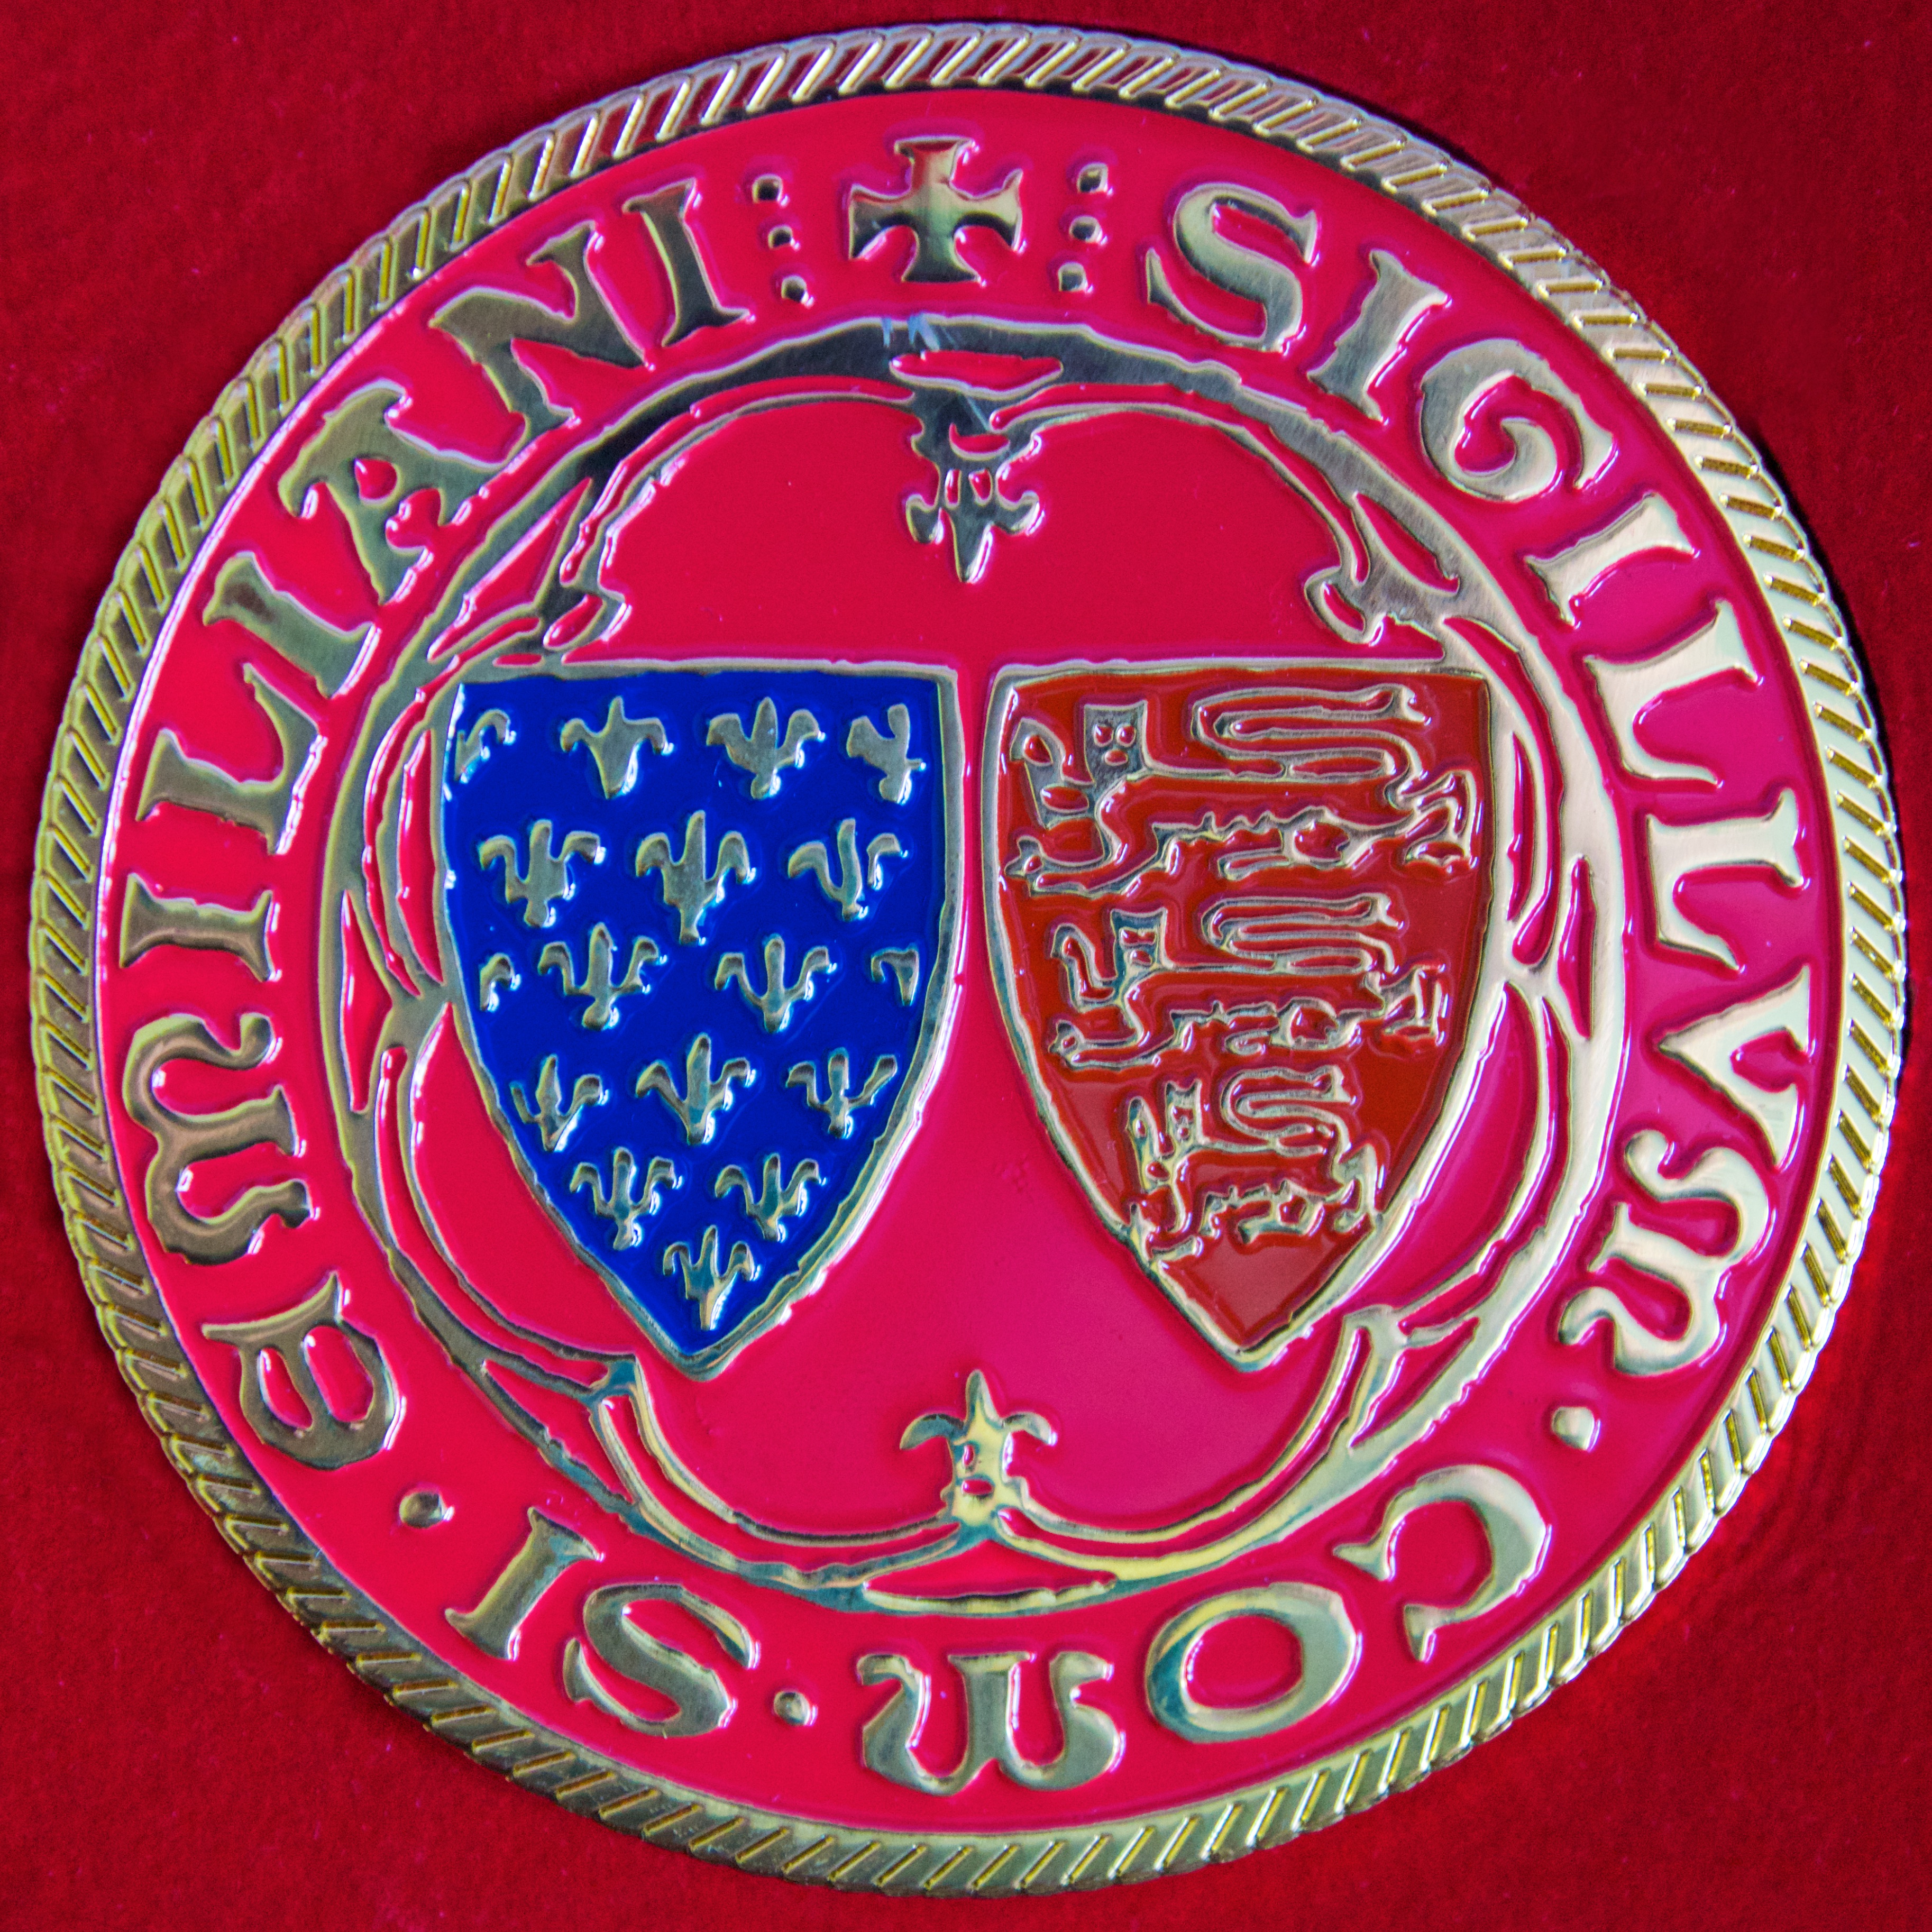 The Great Seal of the Jurade